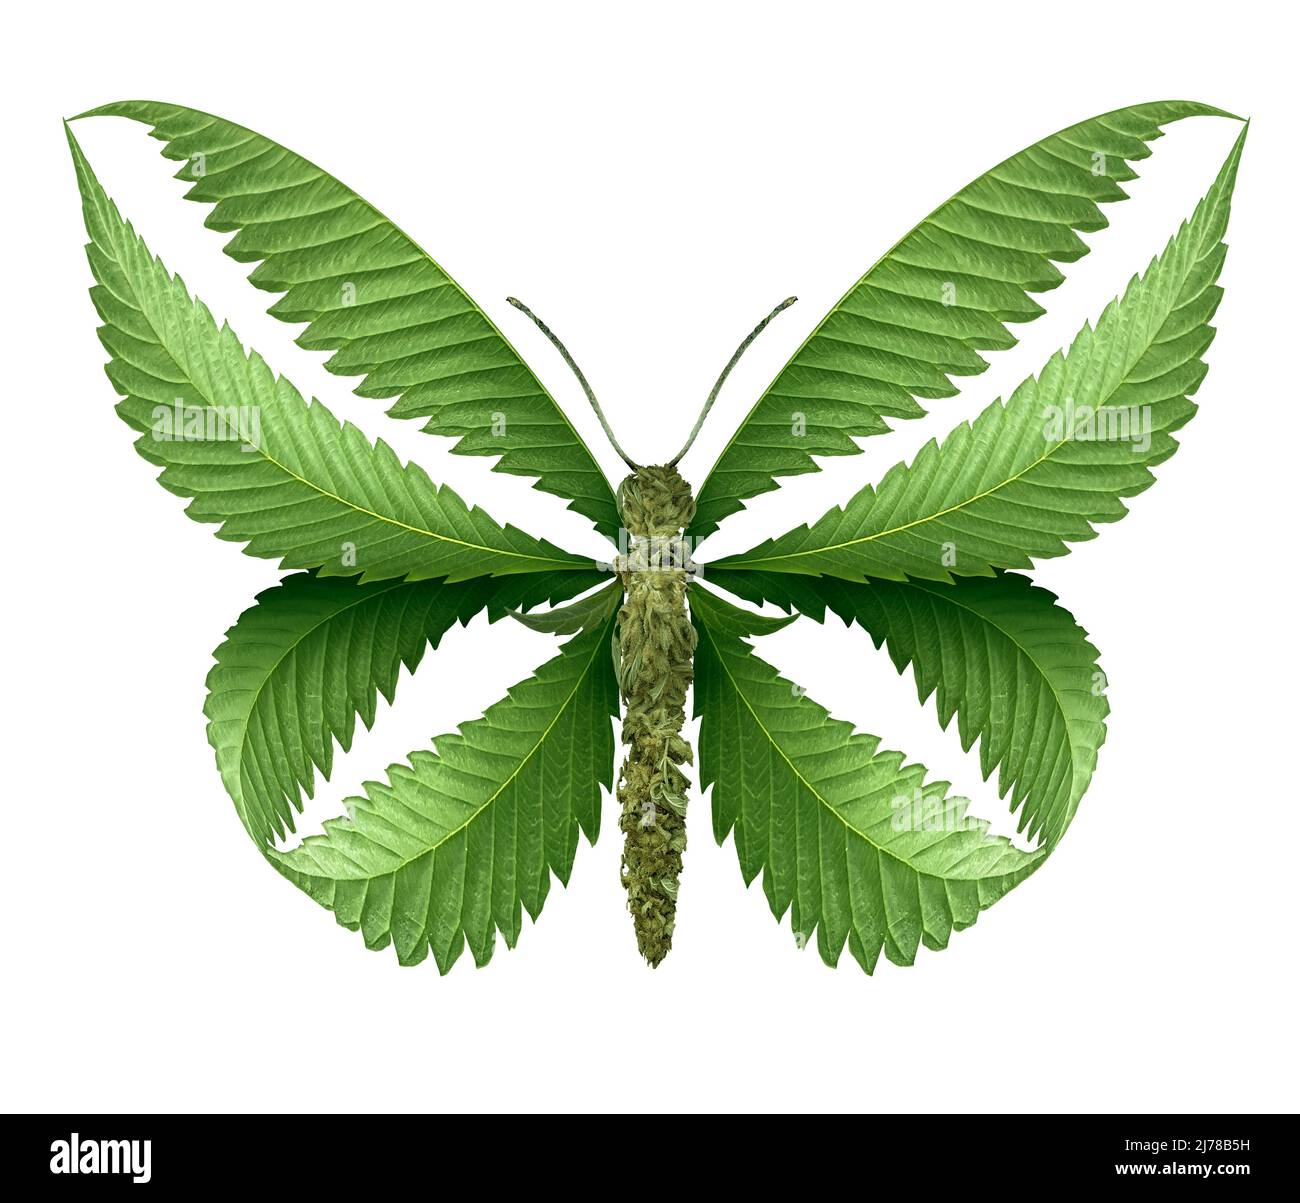 Marijuana butterfly and cannabis symbol as a weed leaves representing pot or herbal medicine isolated on a white background. Stock Photo